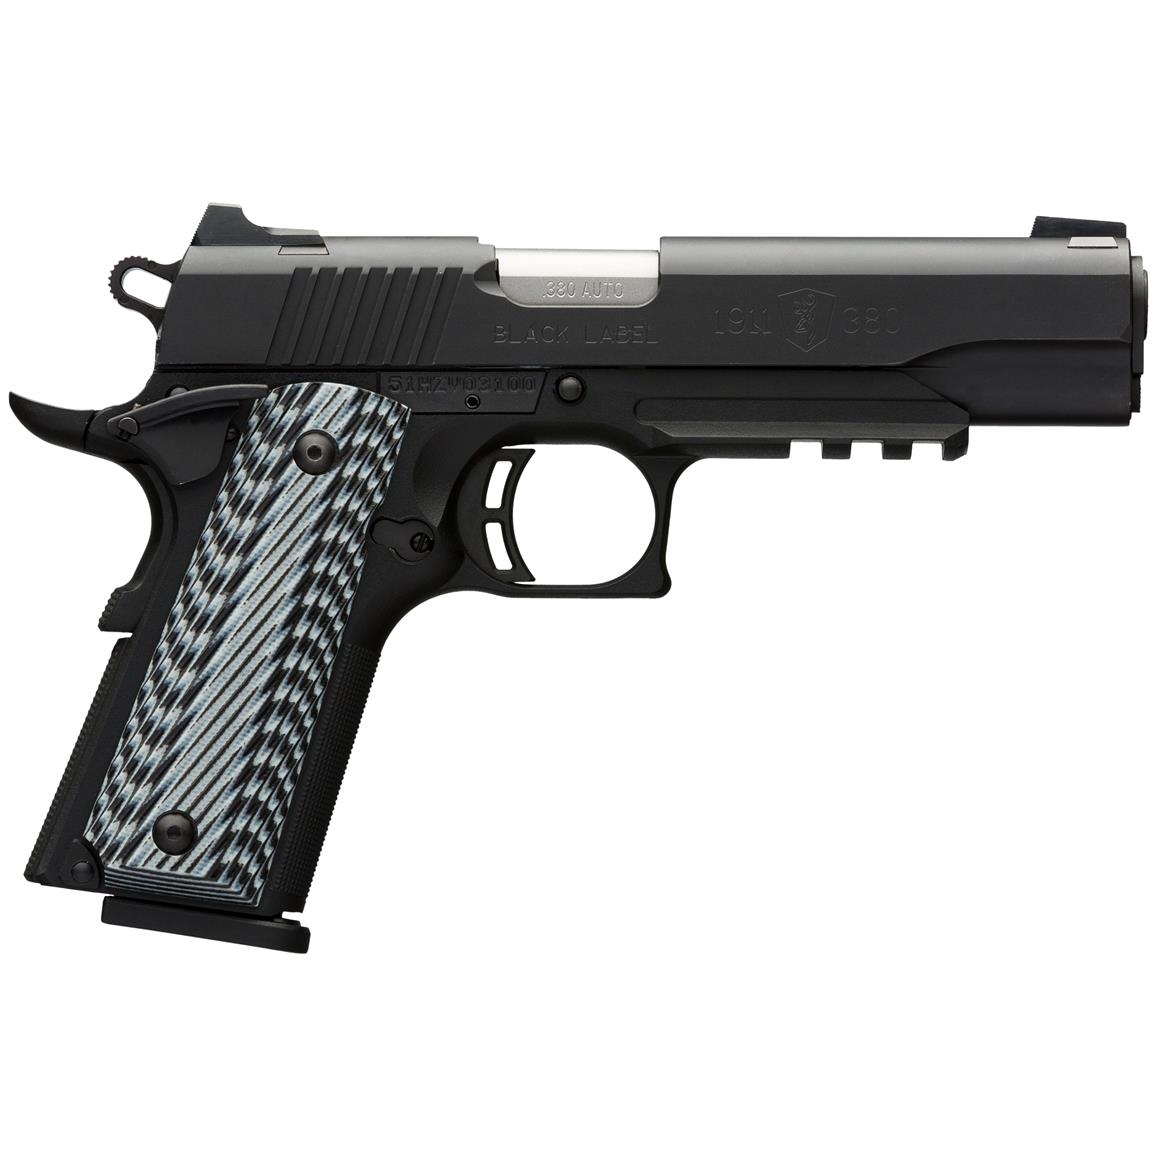 Browning 1911-380 Black Label Pro with Rail, Semi-automatic, .380 ACP, 4.25" Barrel, 8 rounds